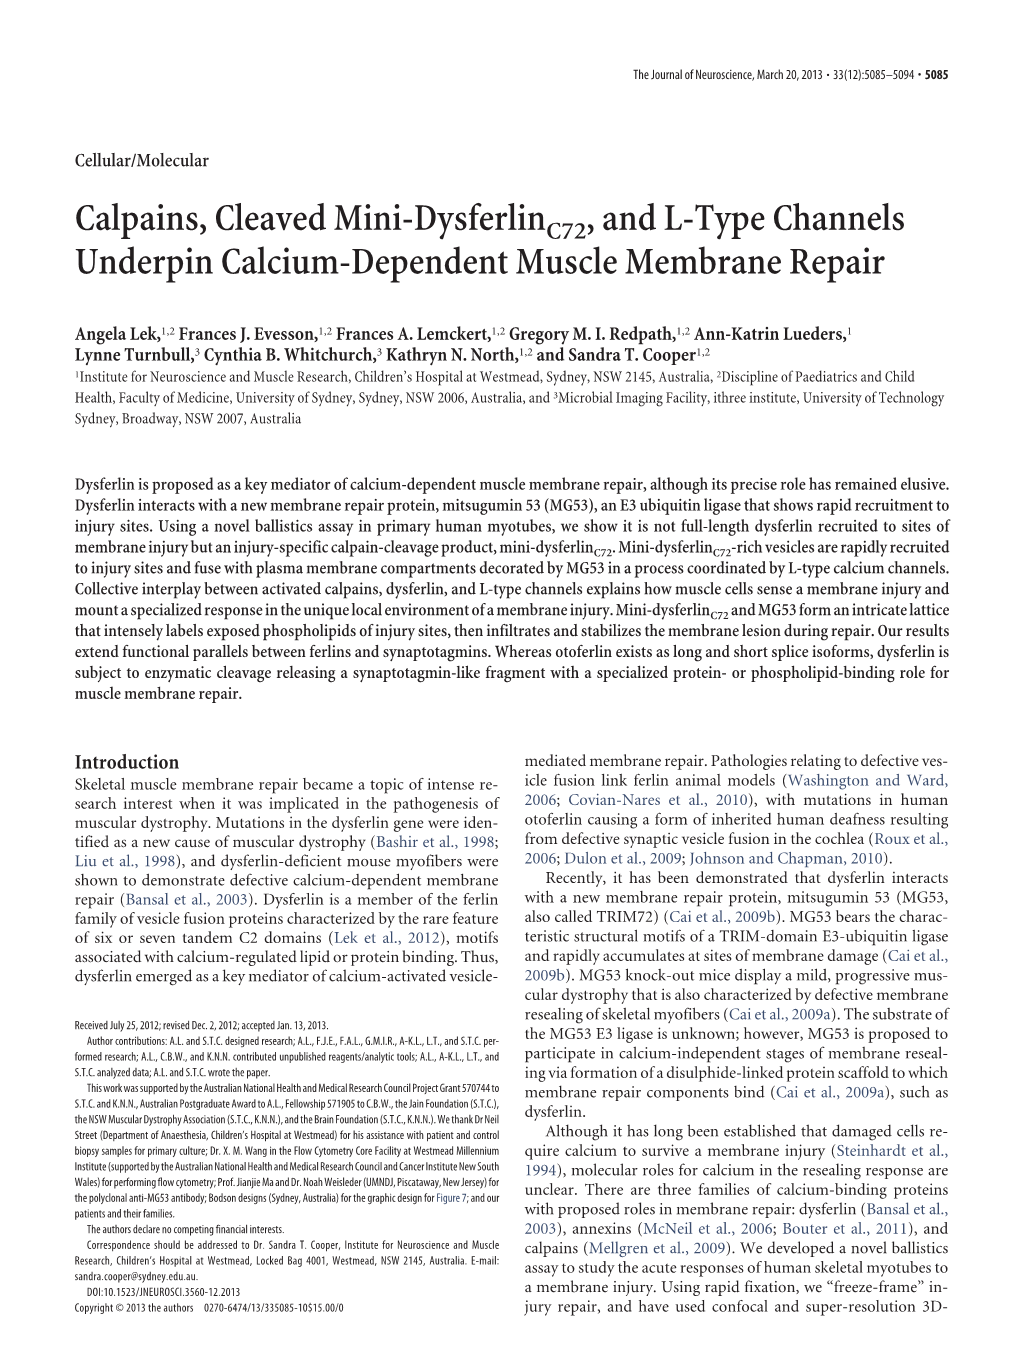 Calpains, Cleaved Mini-Dysferlinc72 , and L-Type Channels Underpin